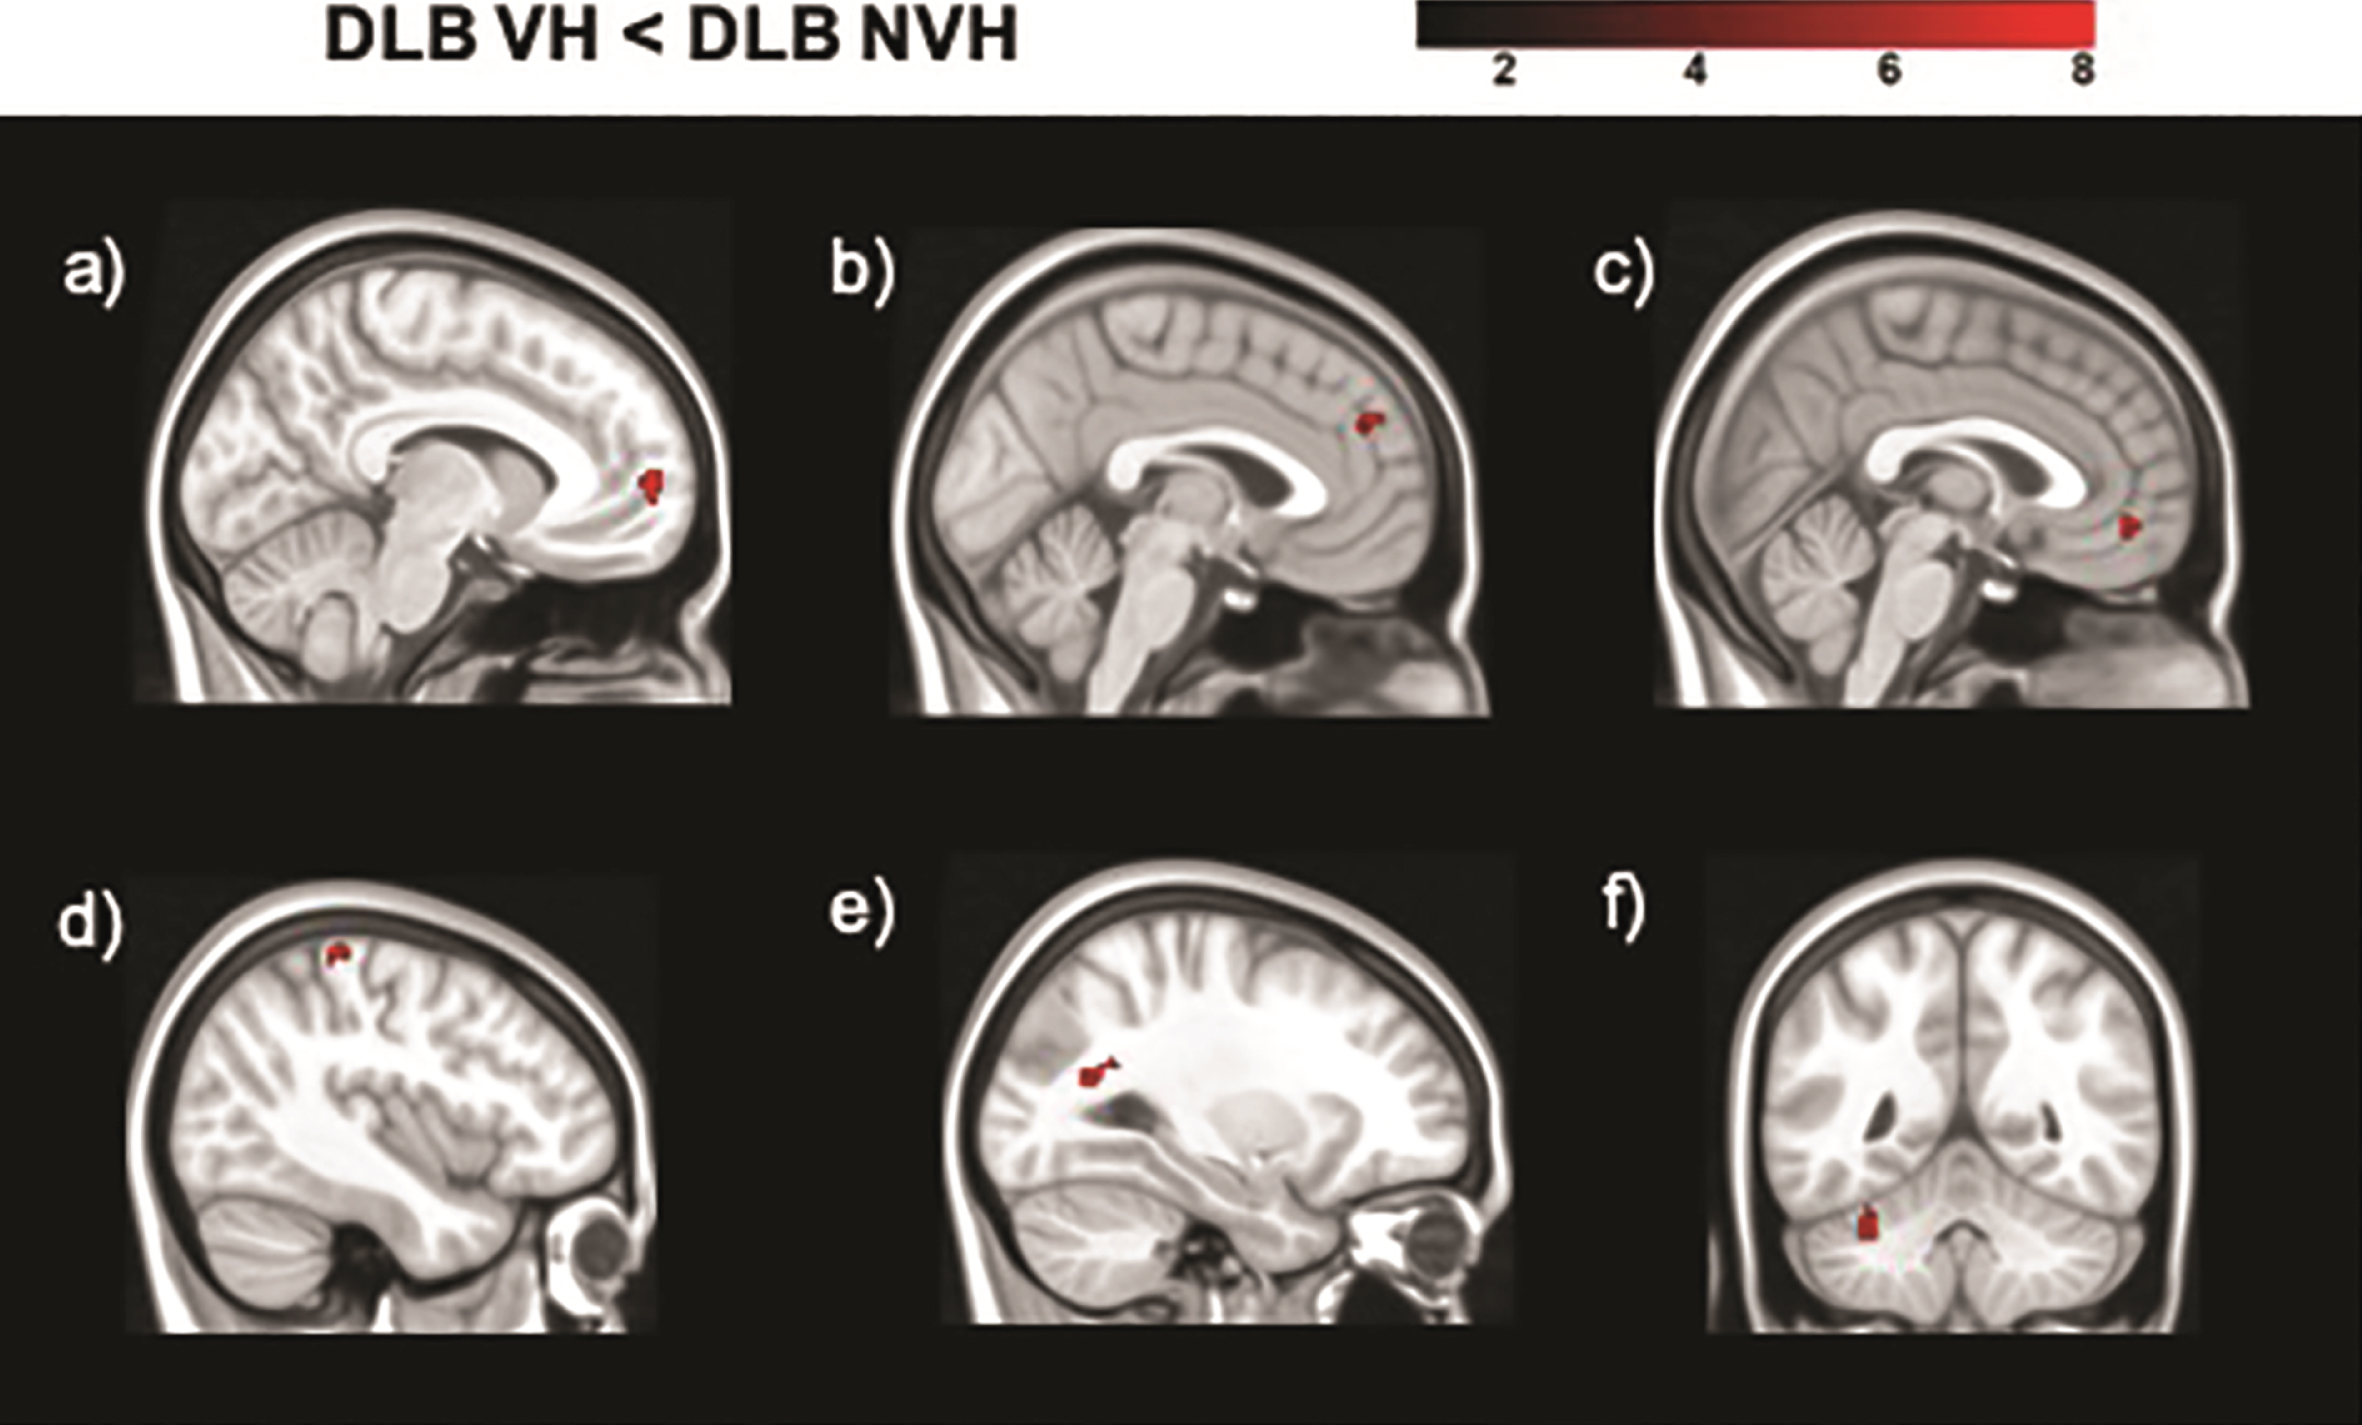 Regions of decreased functional connectivity in DLB patients with VH compared to those without obtained in the analyses of the following seeds: a) right putamen; b) left superior parietal lobule (BA 7); c) left lateral geniculate nucleus; d) right primary visual cortex (BA 17); e) right primary visual cortex (BA 17); f) left primary visual cortex (BA 17). The color bar indicates the z scores with the cluster-level threshold of p < 0.05 Family-Wise Error corrected for multiple comparisons with total intracranial volume and age as covariates of no interest.